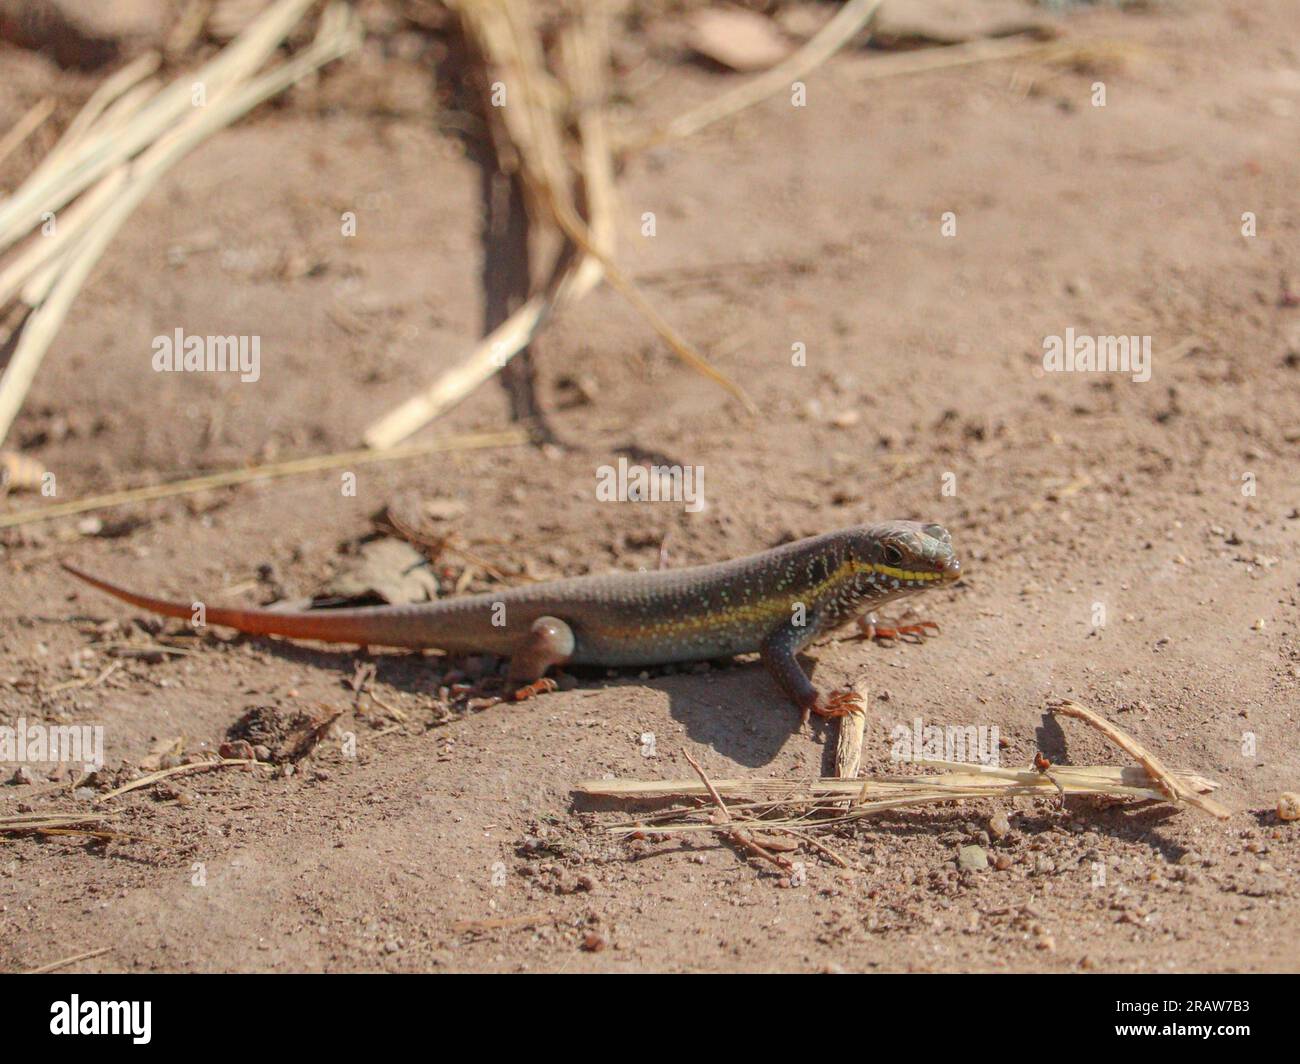 African Five Lined Skink (Trachylepis quinquetaeniata) Stock Photo